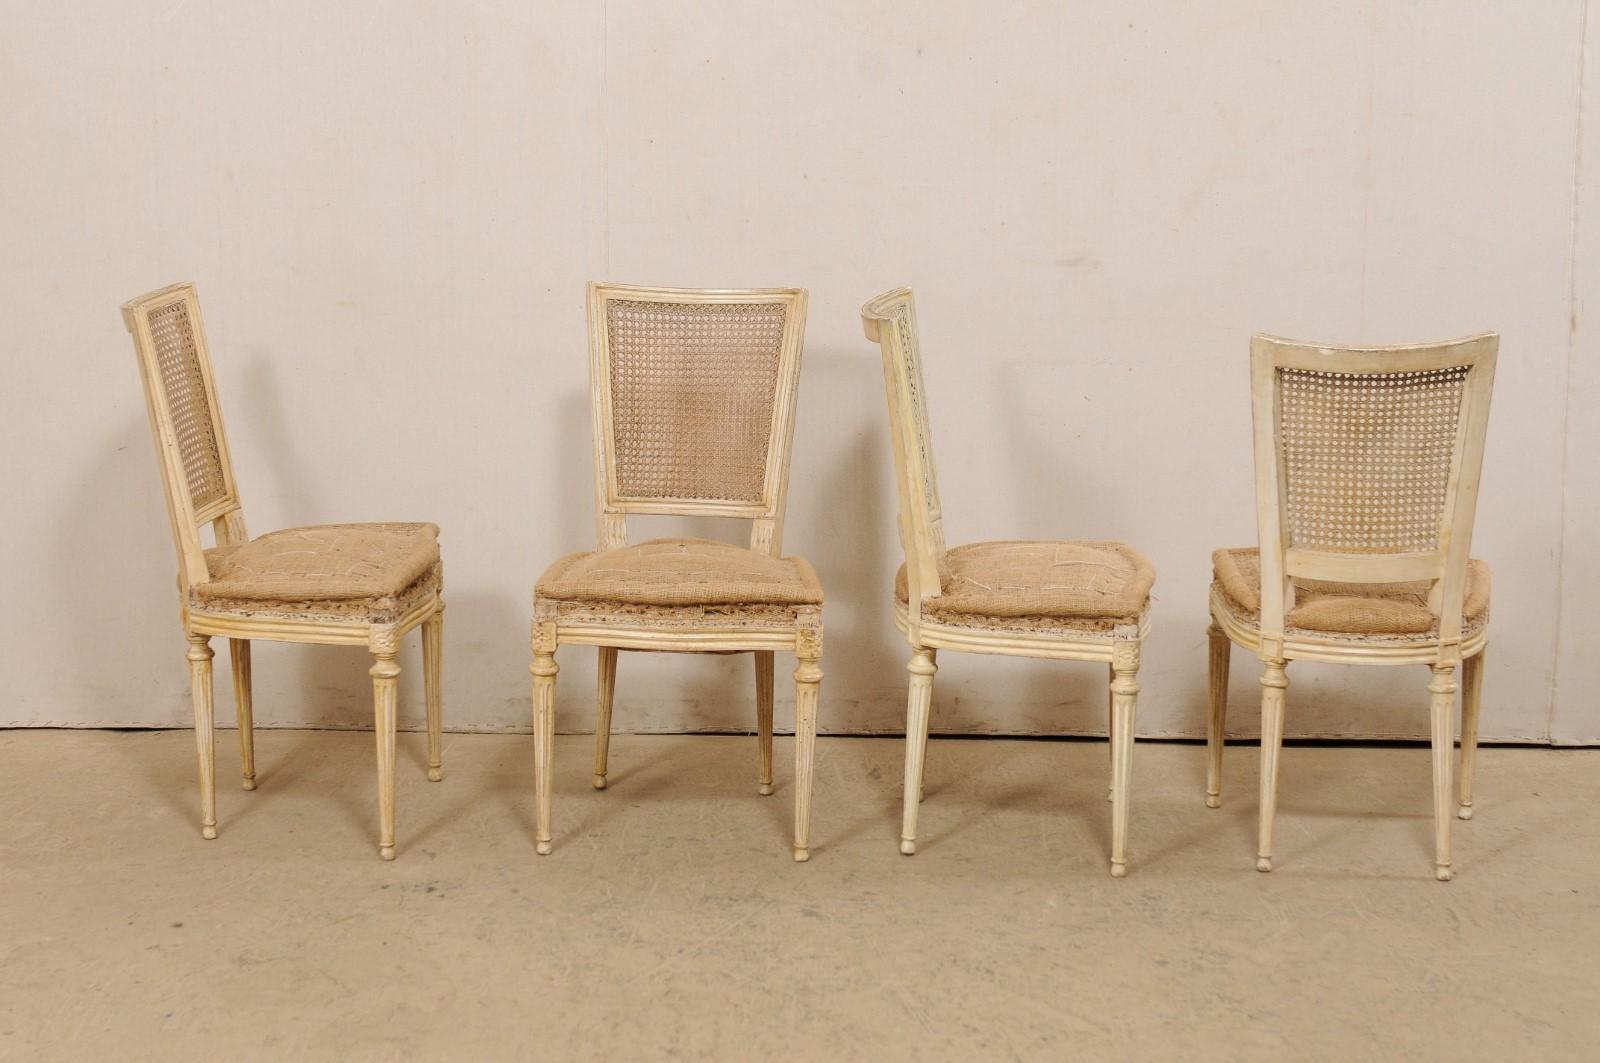 A set of six French Louis XVI style cane back chairs from the early 20th century. This antique set of side chairs from France each features a squared back with hand-woven cane framed within a simple and clean molded trim about the crest rail and